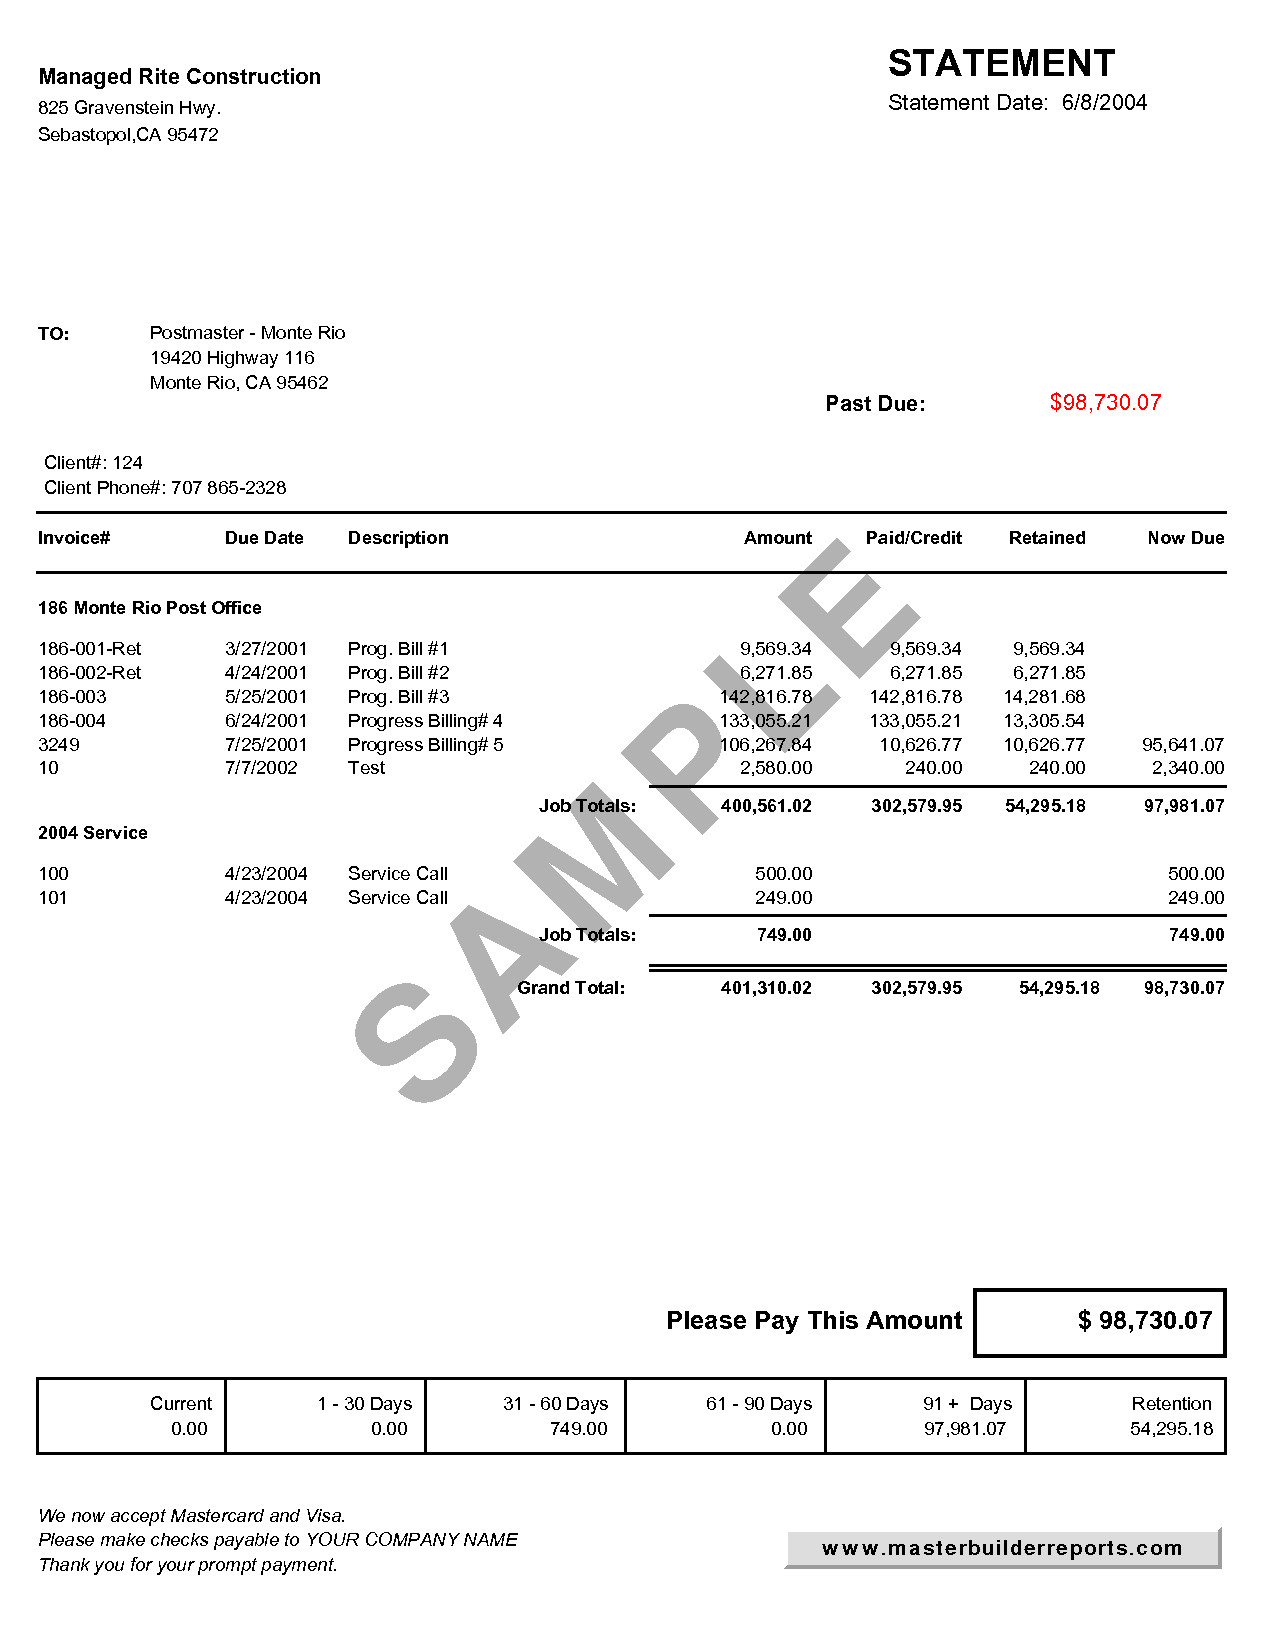 Past Due Invoice Template